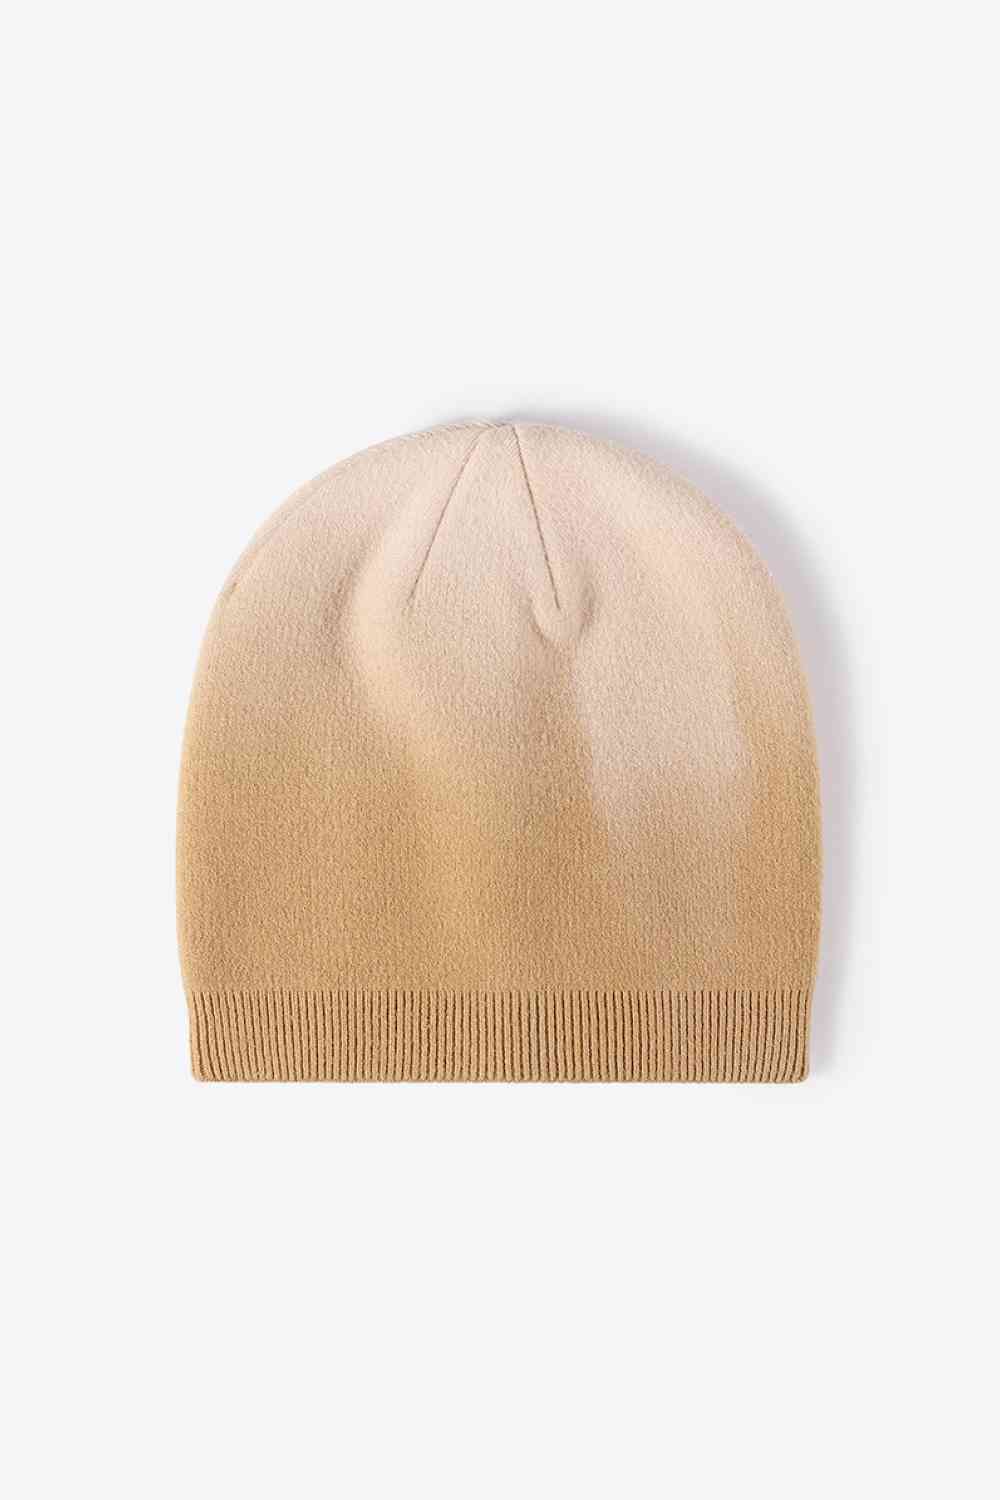 GRADIENT COLOR KNIT BEANIE in Multiple Colors